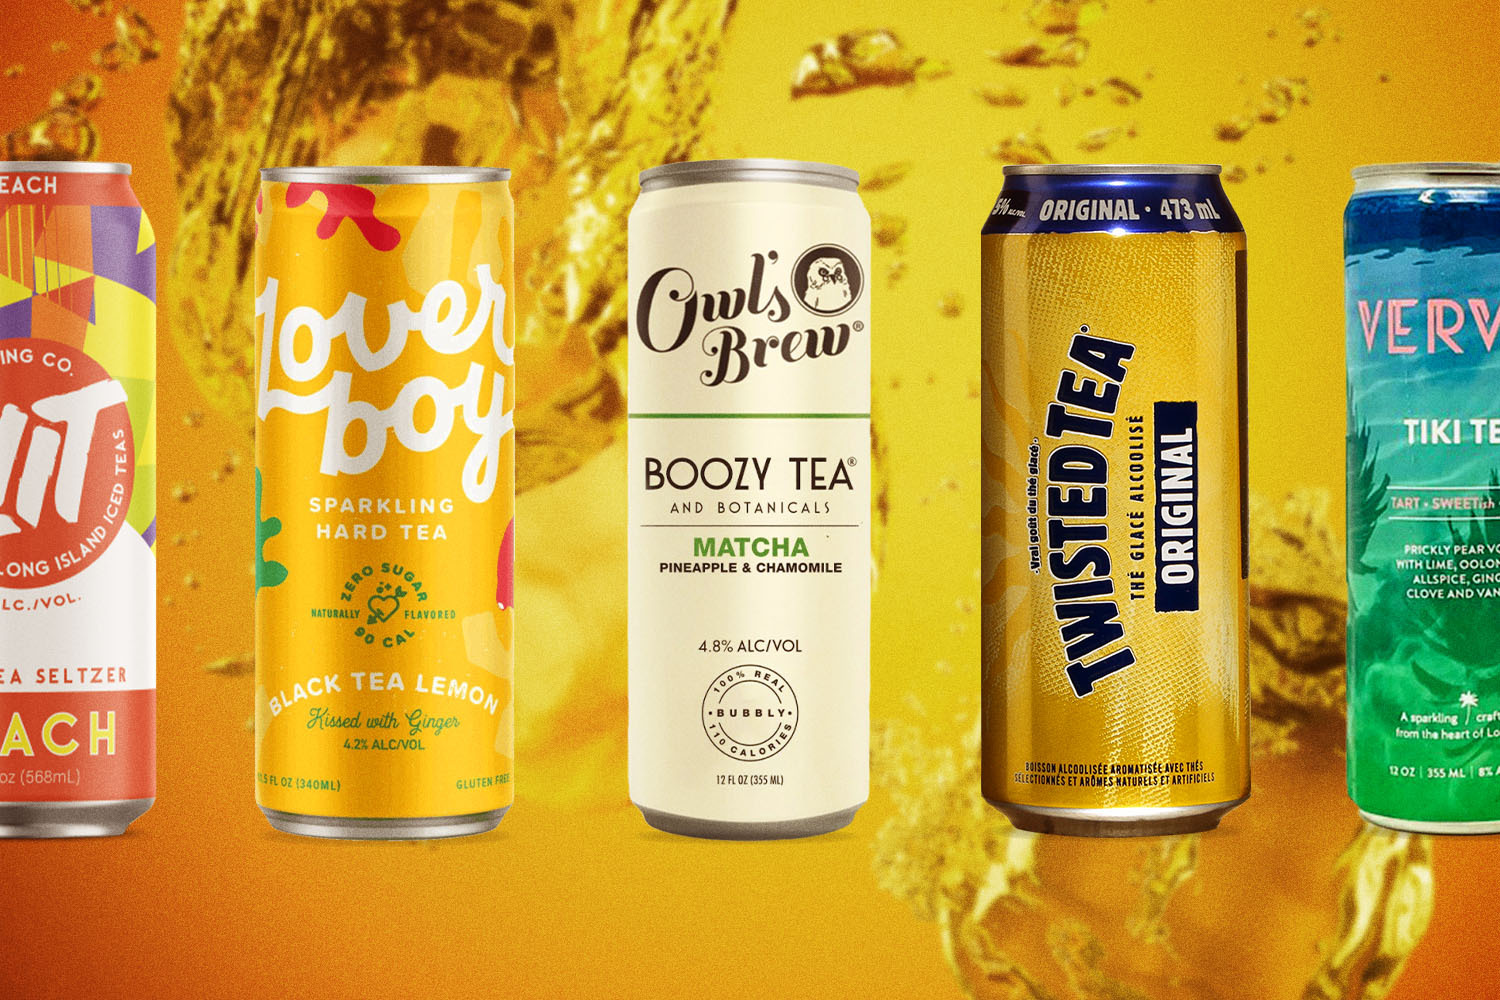 Five cans of boozy hard teas, a growing segment of the RTD market